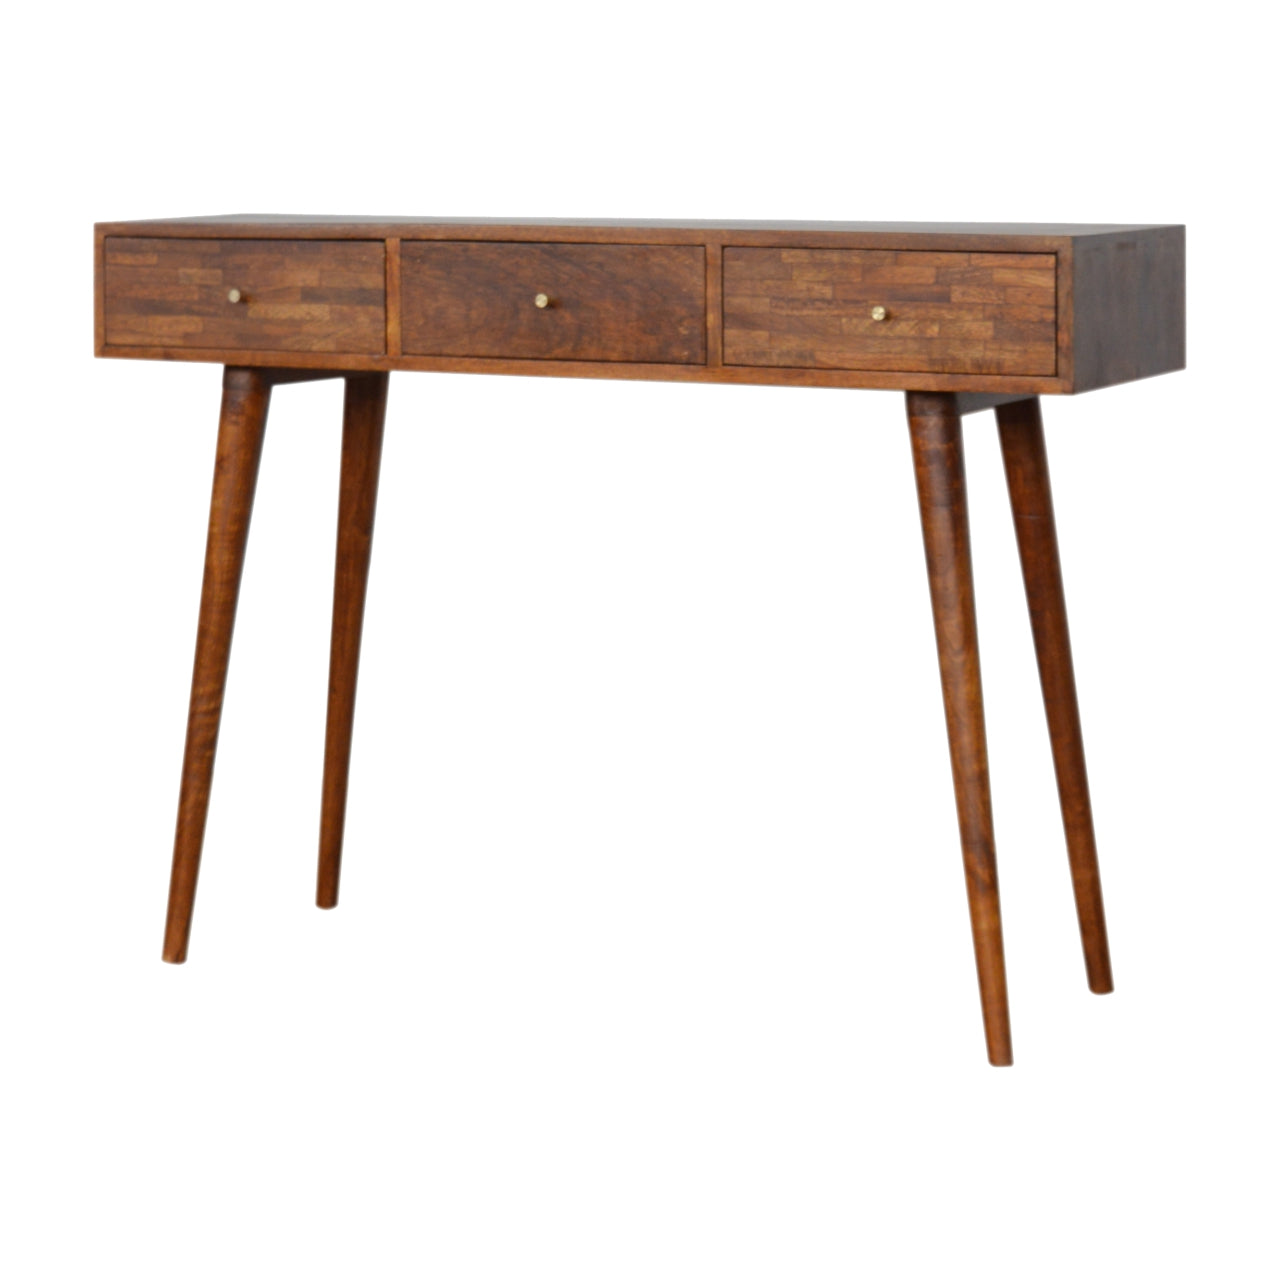 3 Drawer Mixed Chestnut Console Table - mancavesuperstore